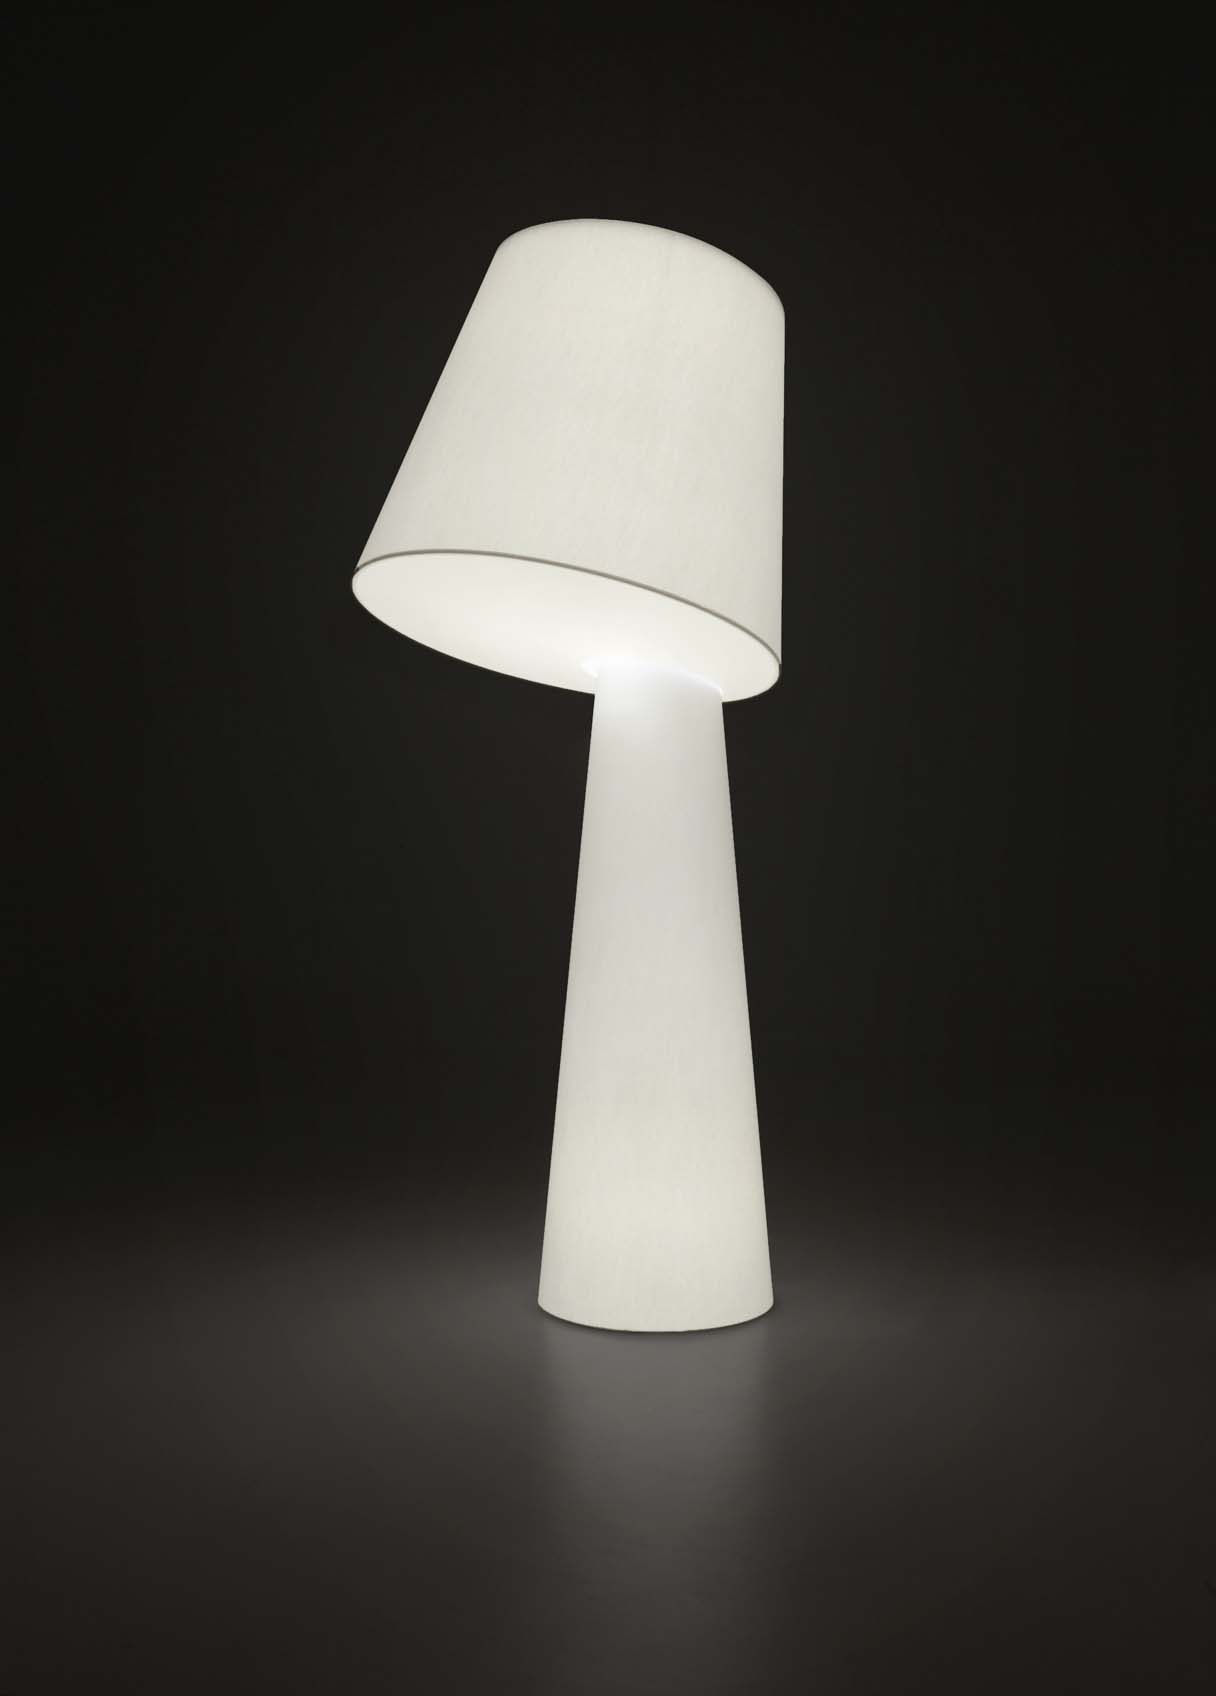 BIG BROTHER Floor Lamp by Oriol Llahona for ALMA LIGHT